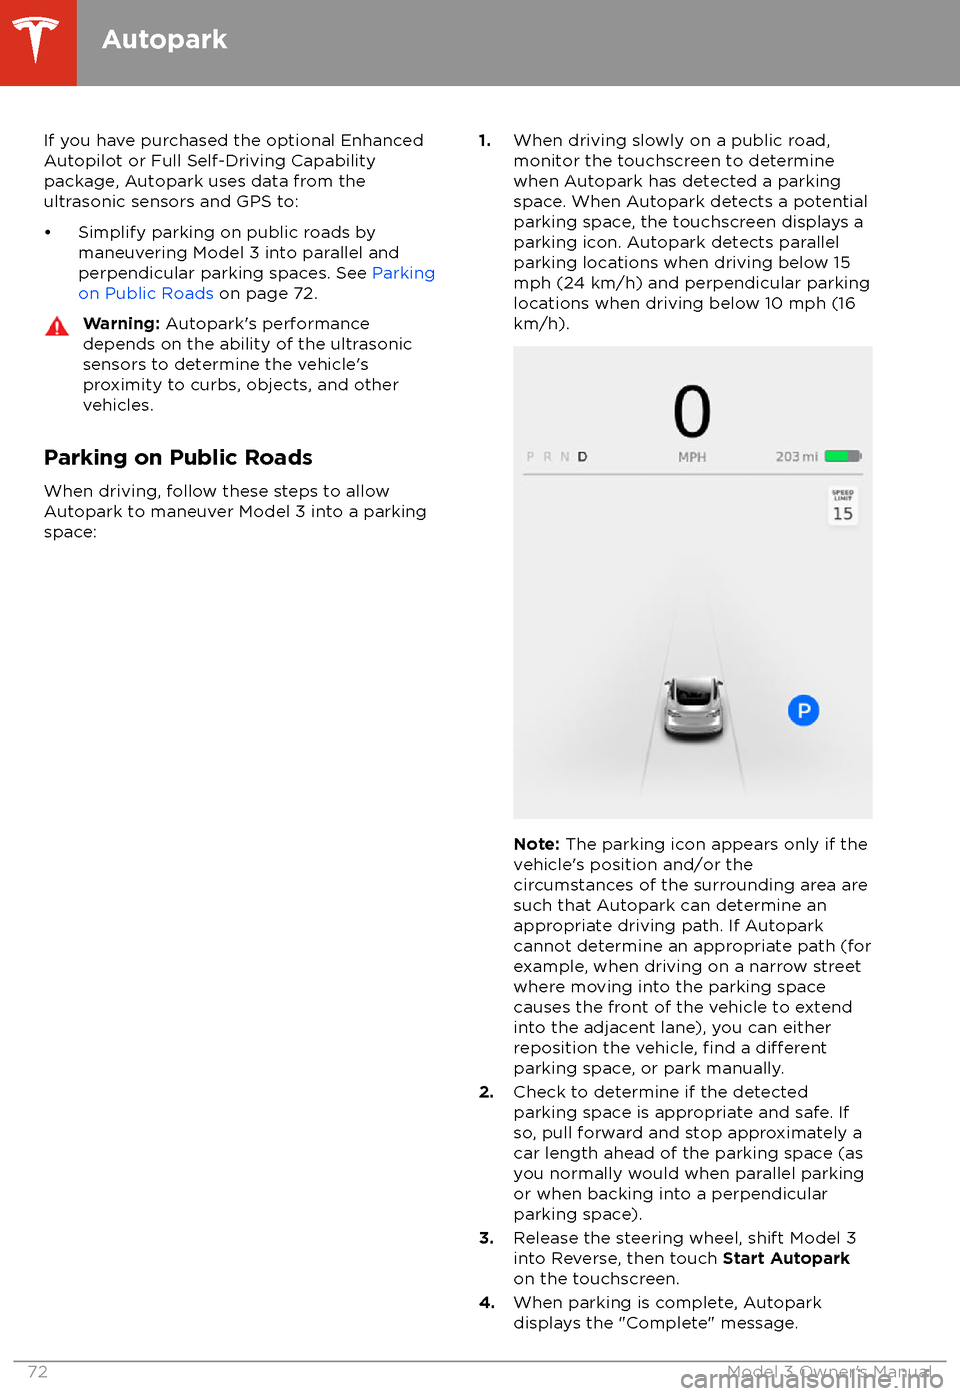 TESLA MODEL 3 2018  Owners Manual If you have purchased the optional EnhancedAutopilot or Full Self-Driving Capabilitypackage, Autopark uses data from theultrasonic sensors and GPS to:
